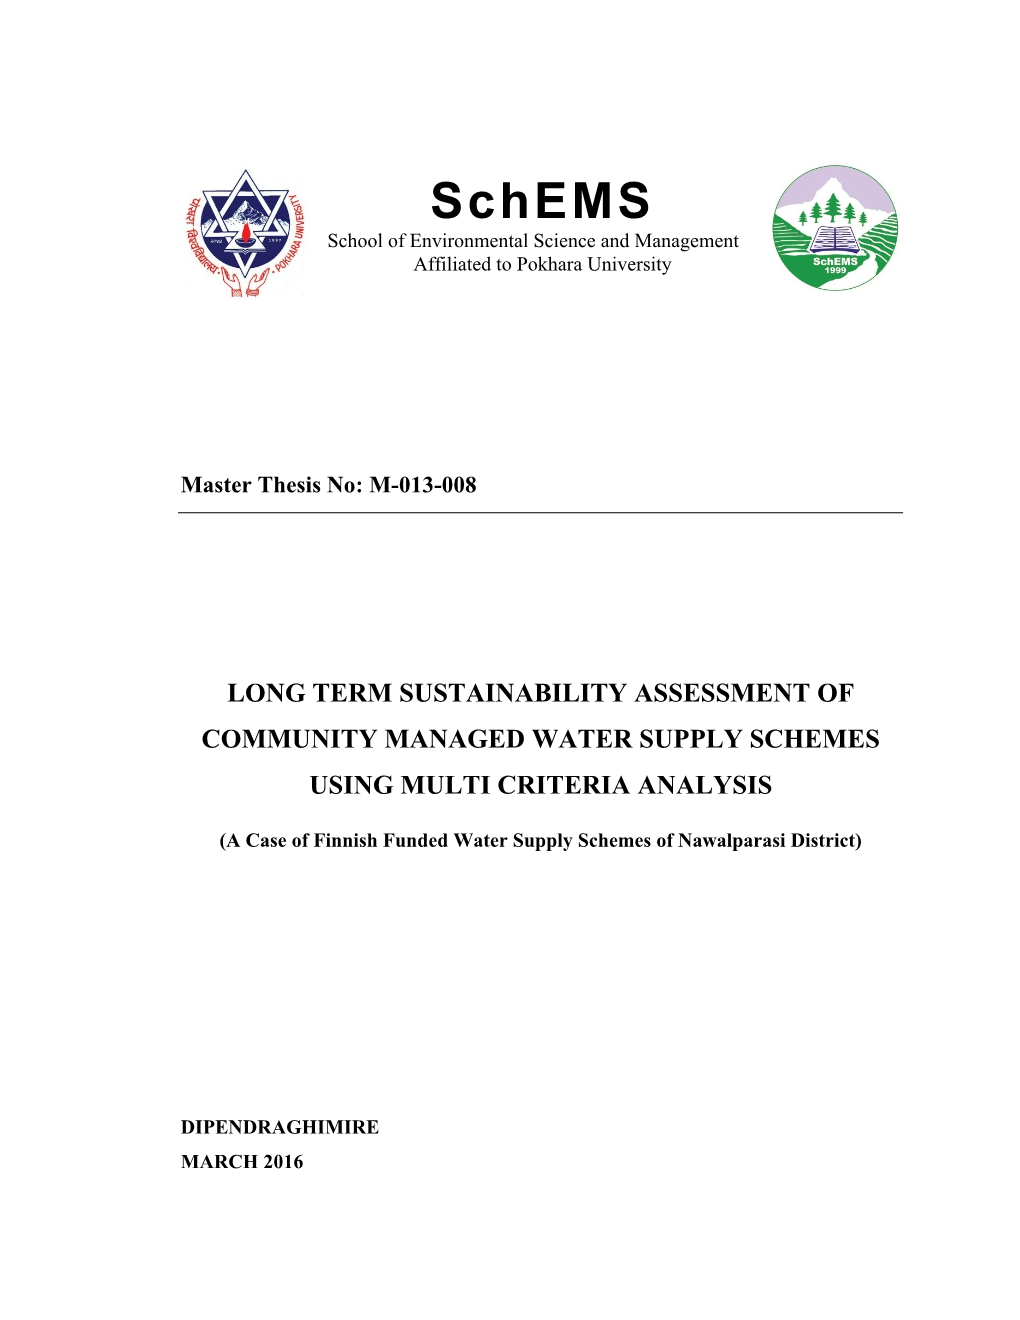 Schems School of Environmental Science and Management Affiliated to Pokhara University